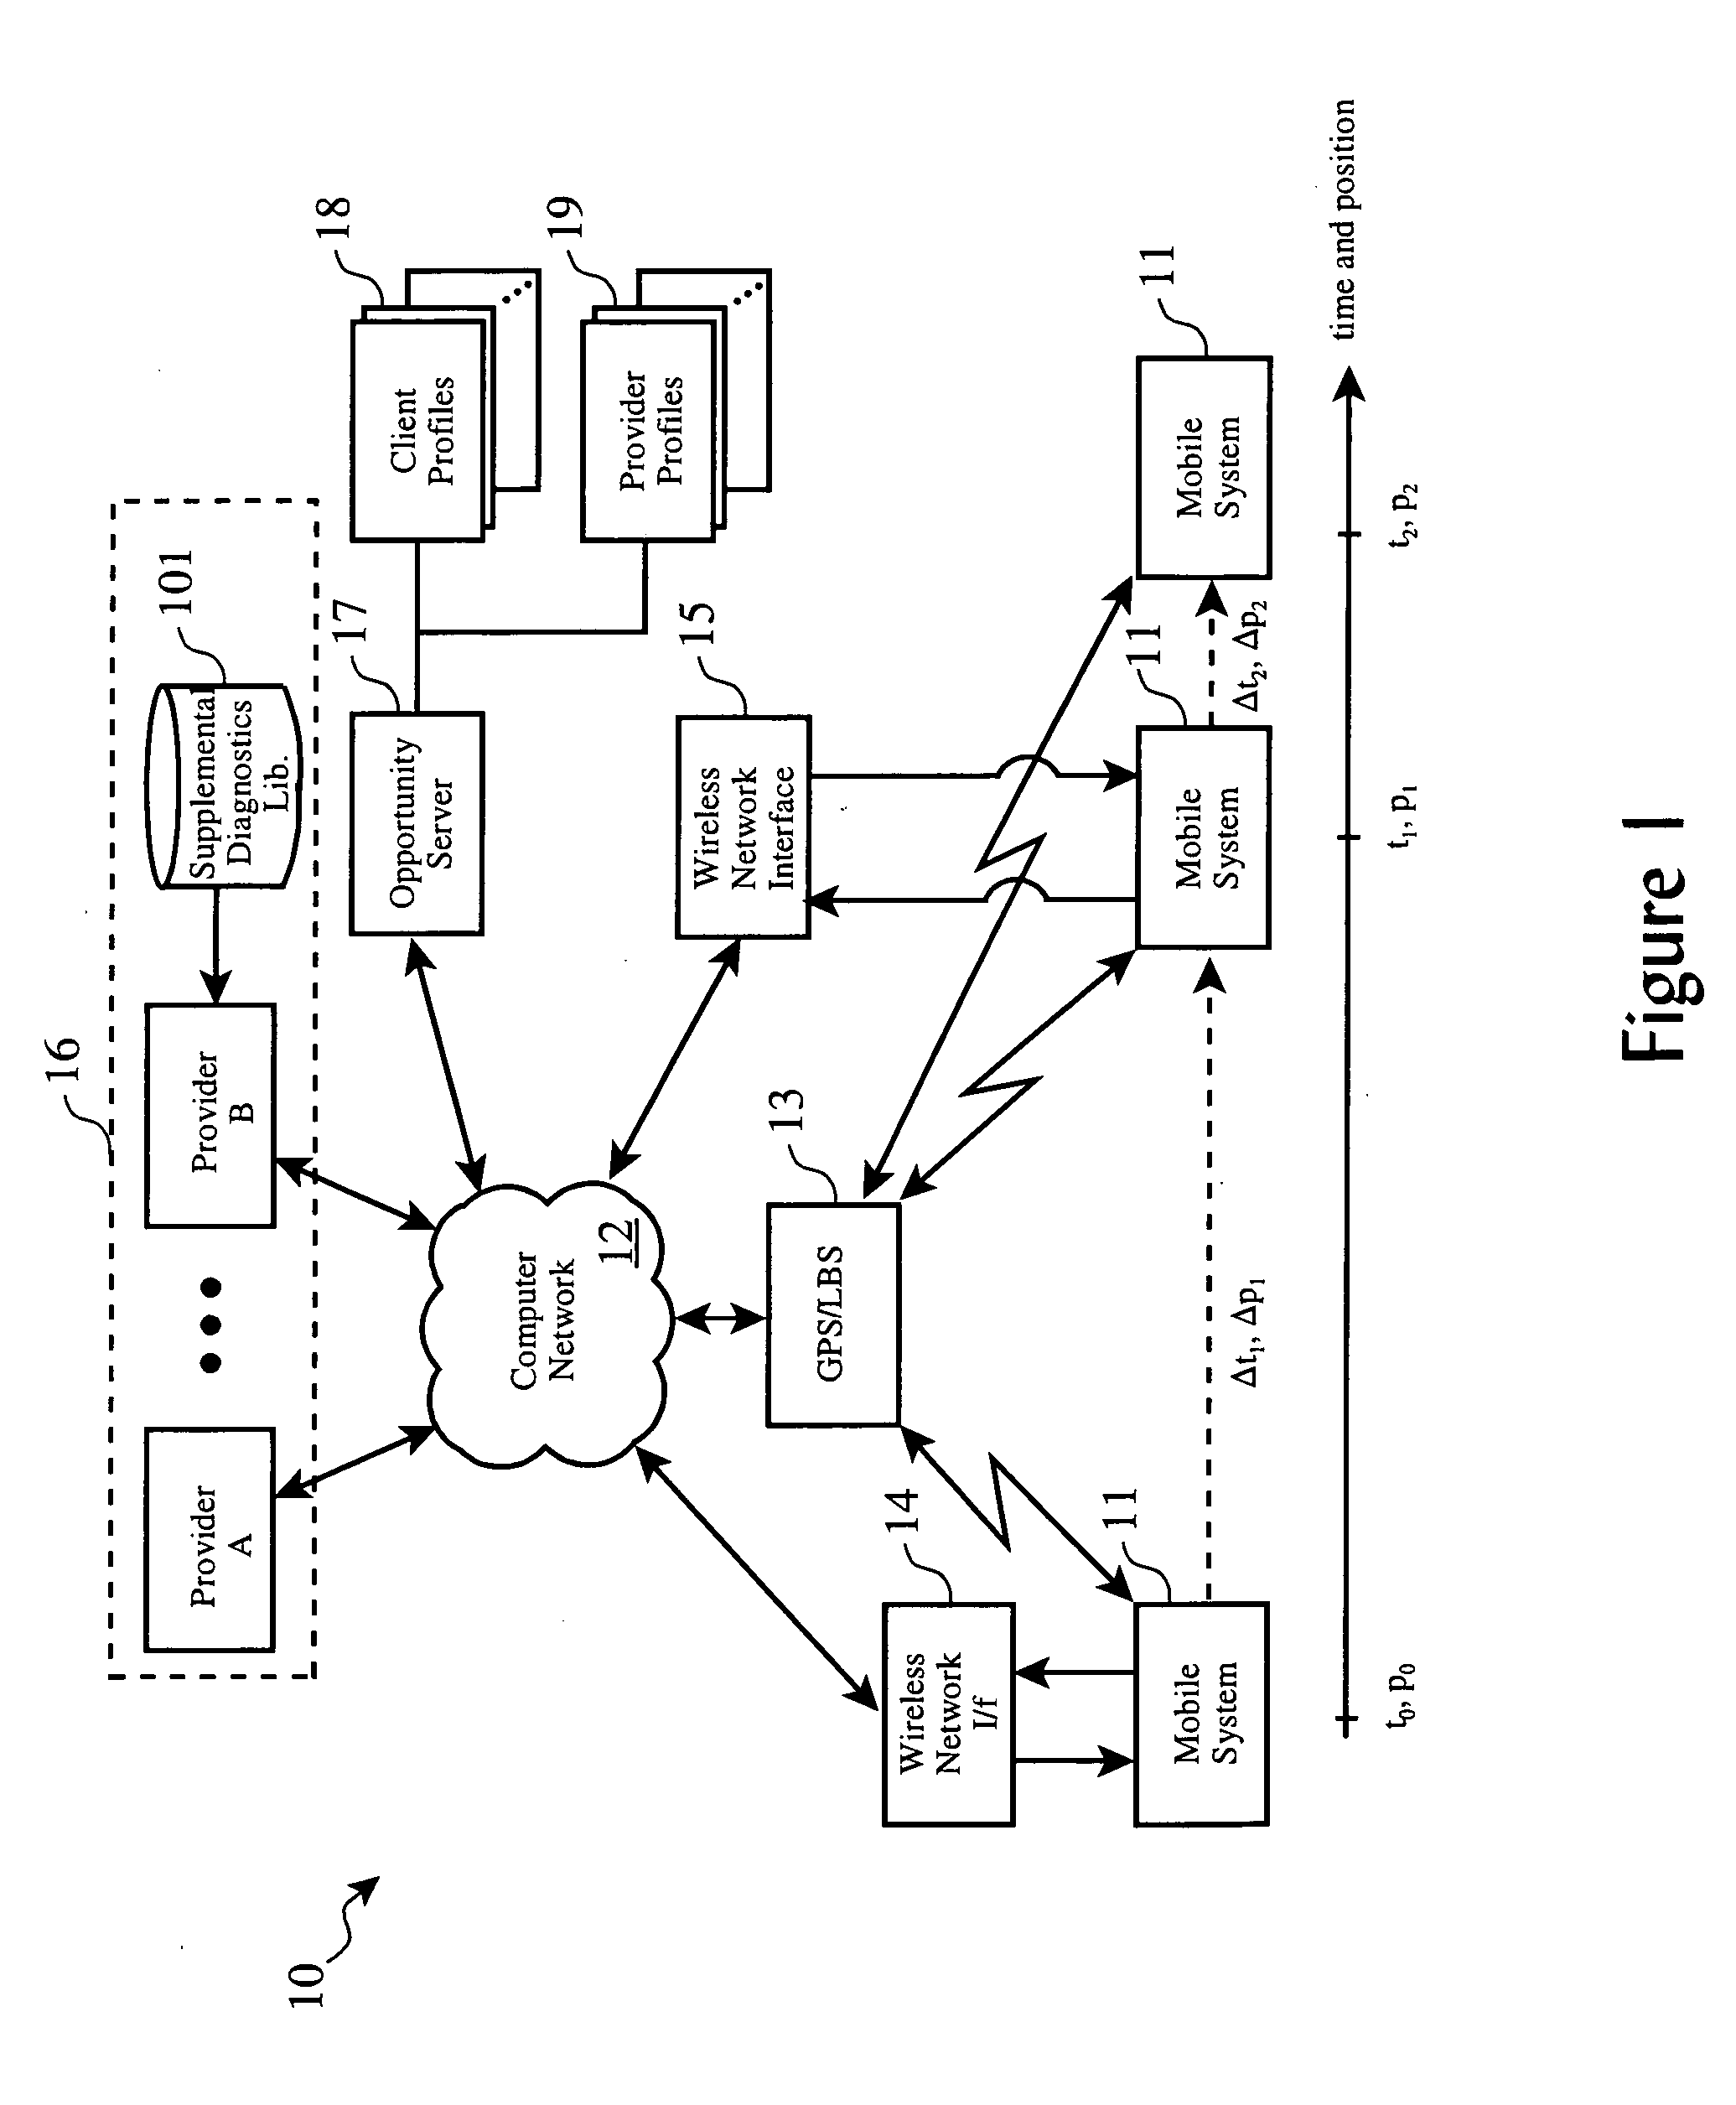 On-demand system for supplemental diagnostic and service resource planning for mobile systems